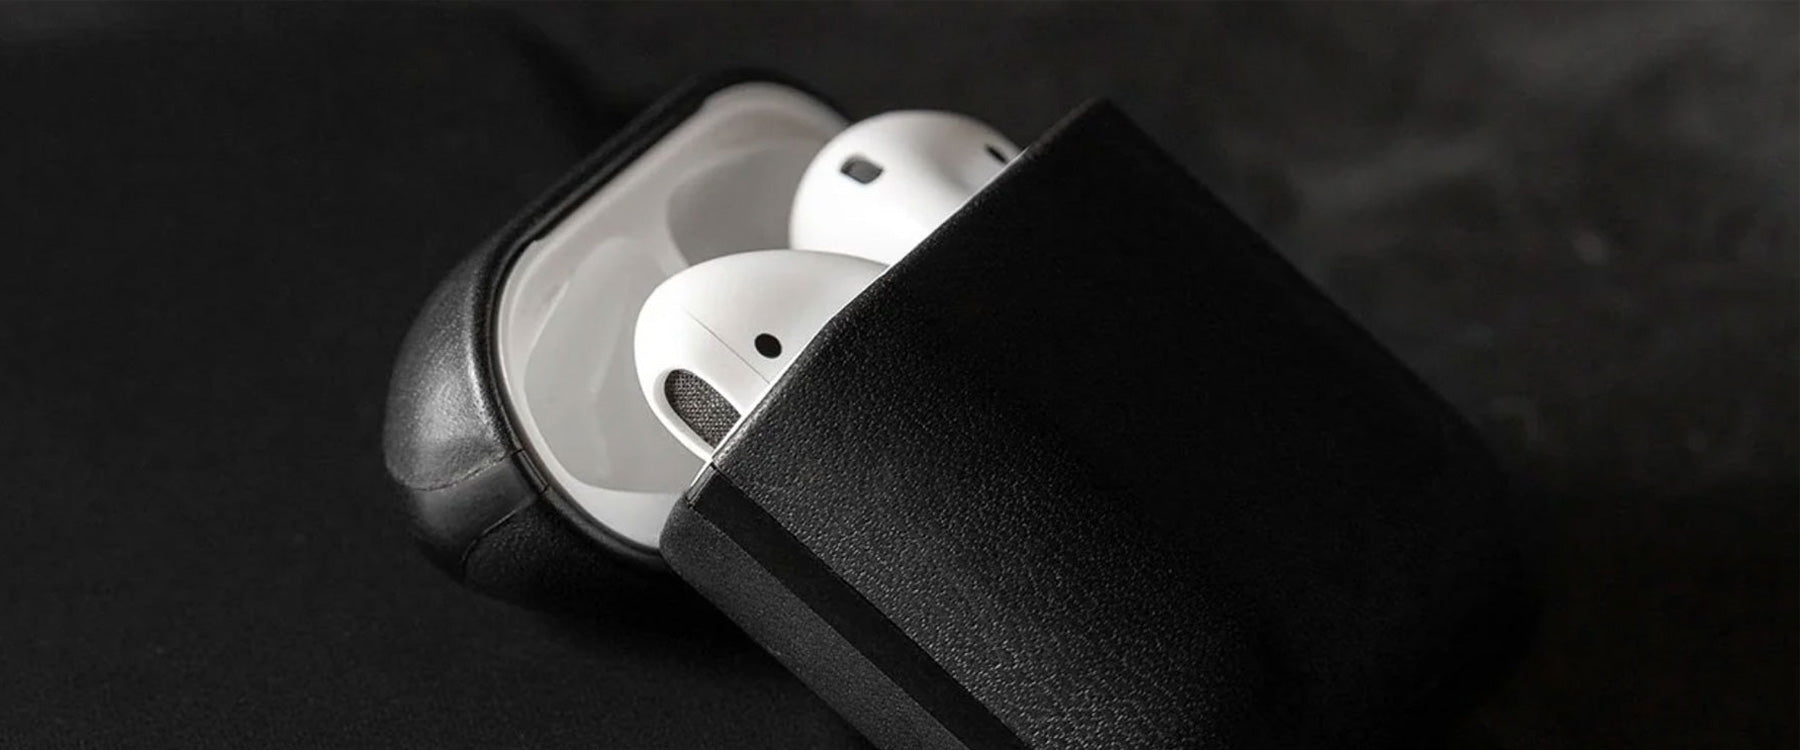 Apple AirPods Accessories - Protective Cases, Pouches & Chargers